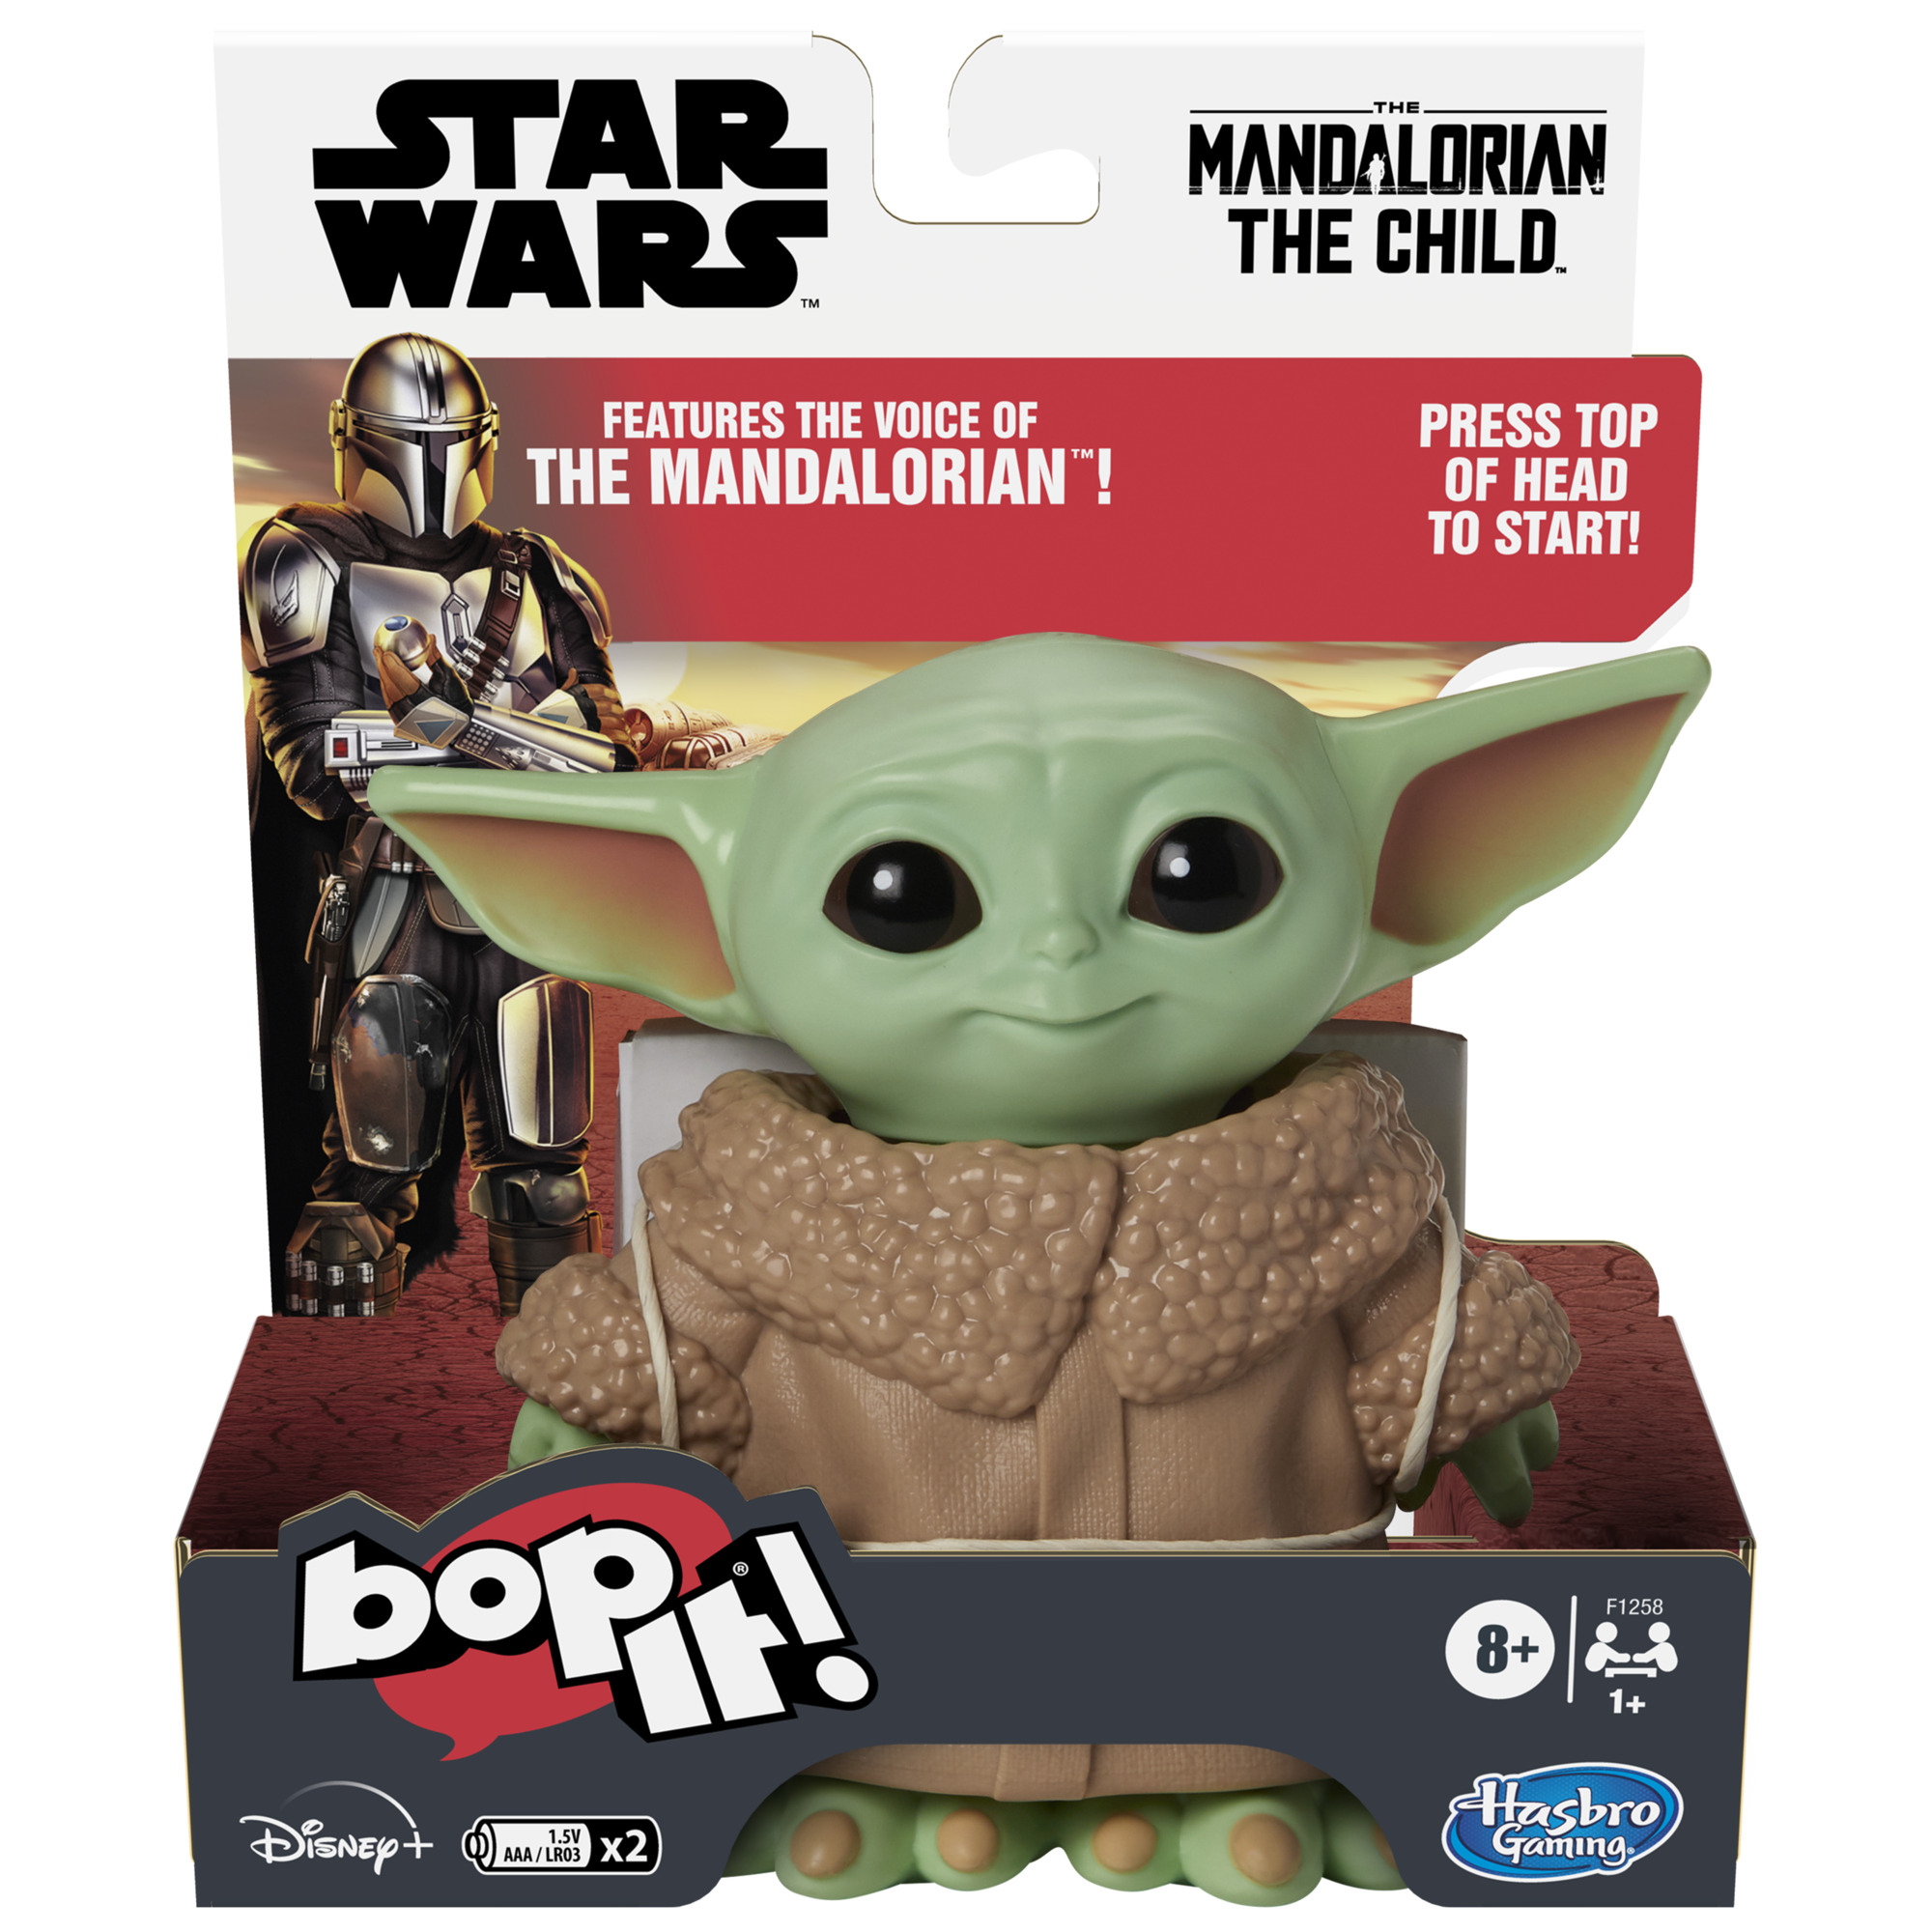 Bop It! Star Wars The Mandalorian The Child Edition Electronic Game for Kids and Family Easter Basket Stuffers Ages 8 9 10 11 12 and Up, 2 Pack, Only At Walmart - image 4 of 8